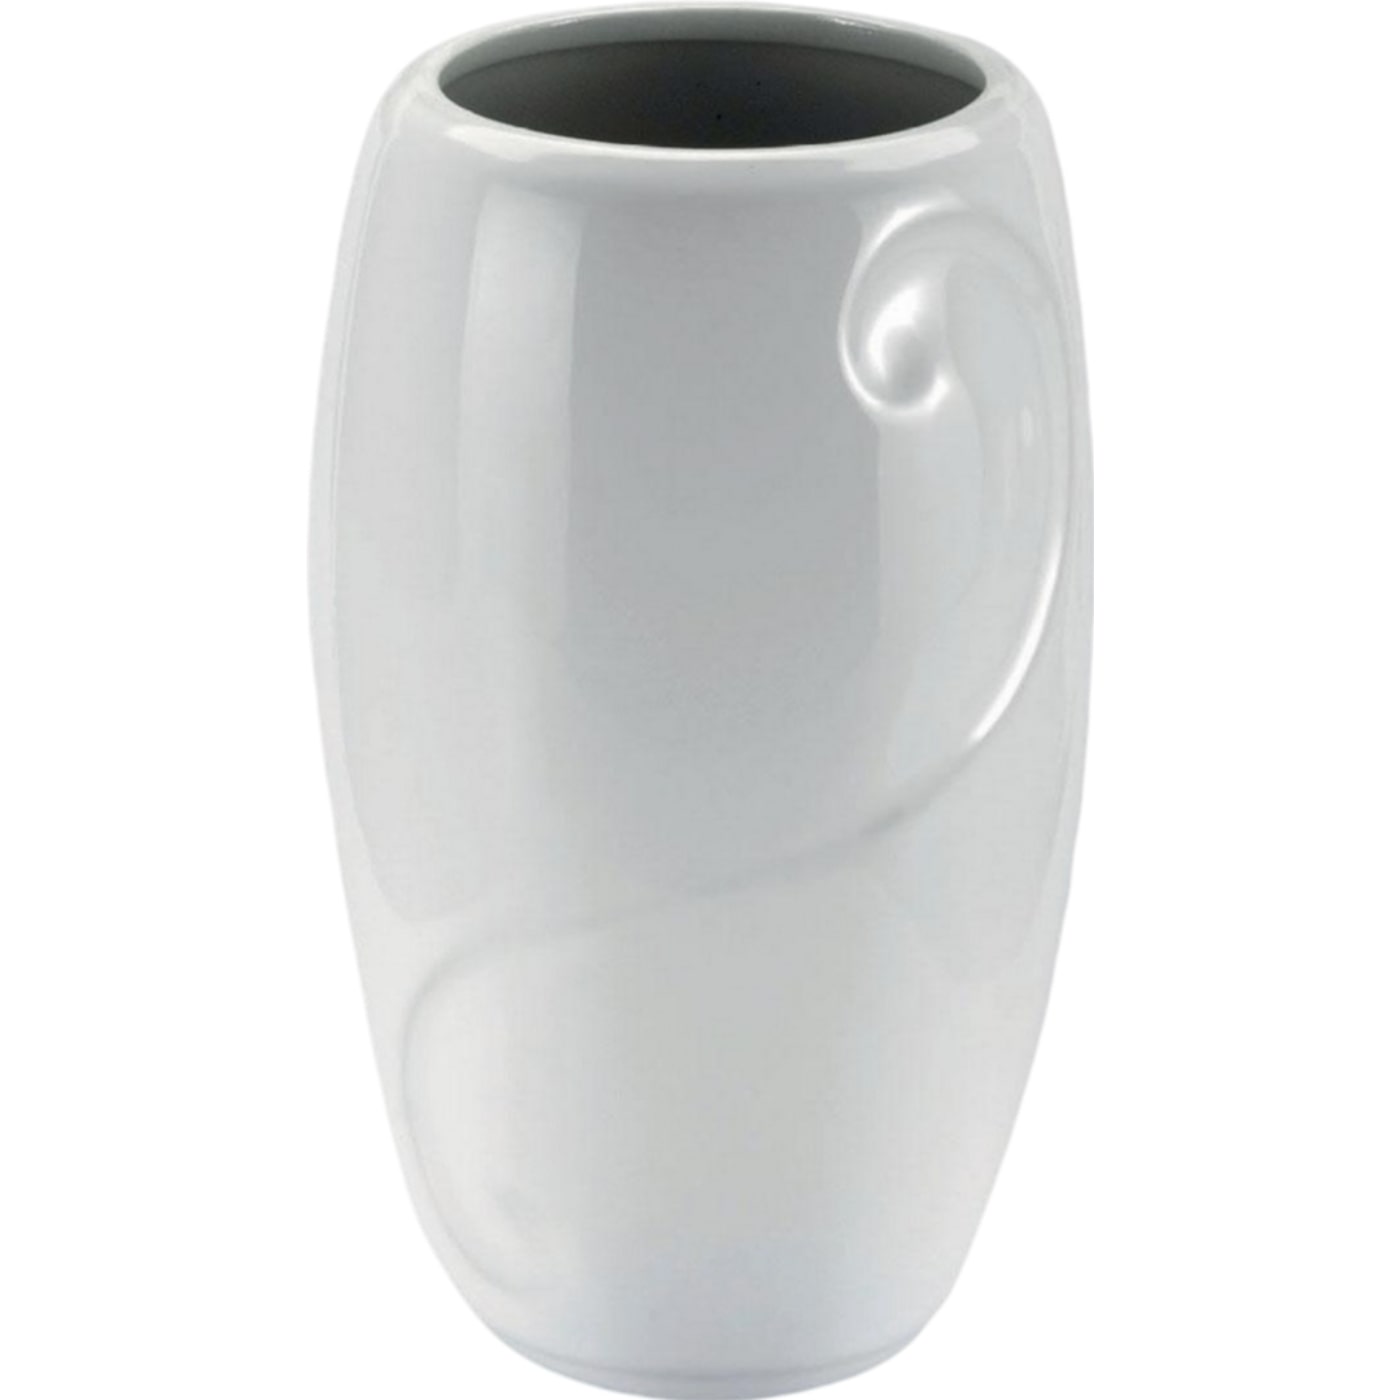 Grave vase Sharon 21x13cm - 8.3x5.1in In white porcelain, wall attached SH124P